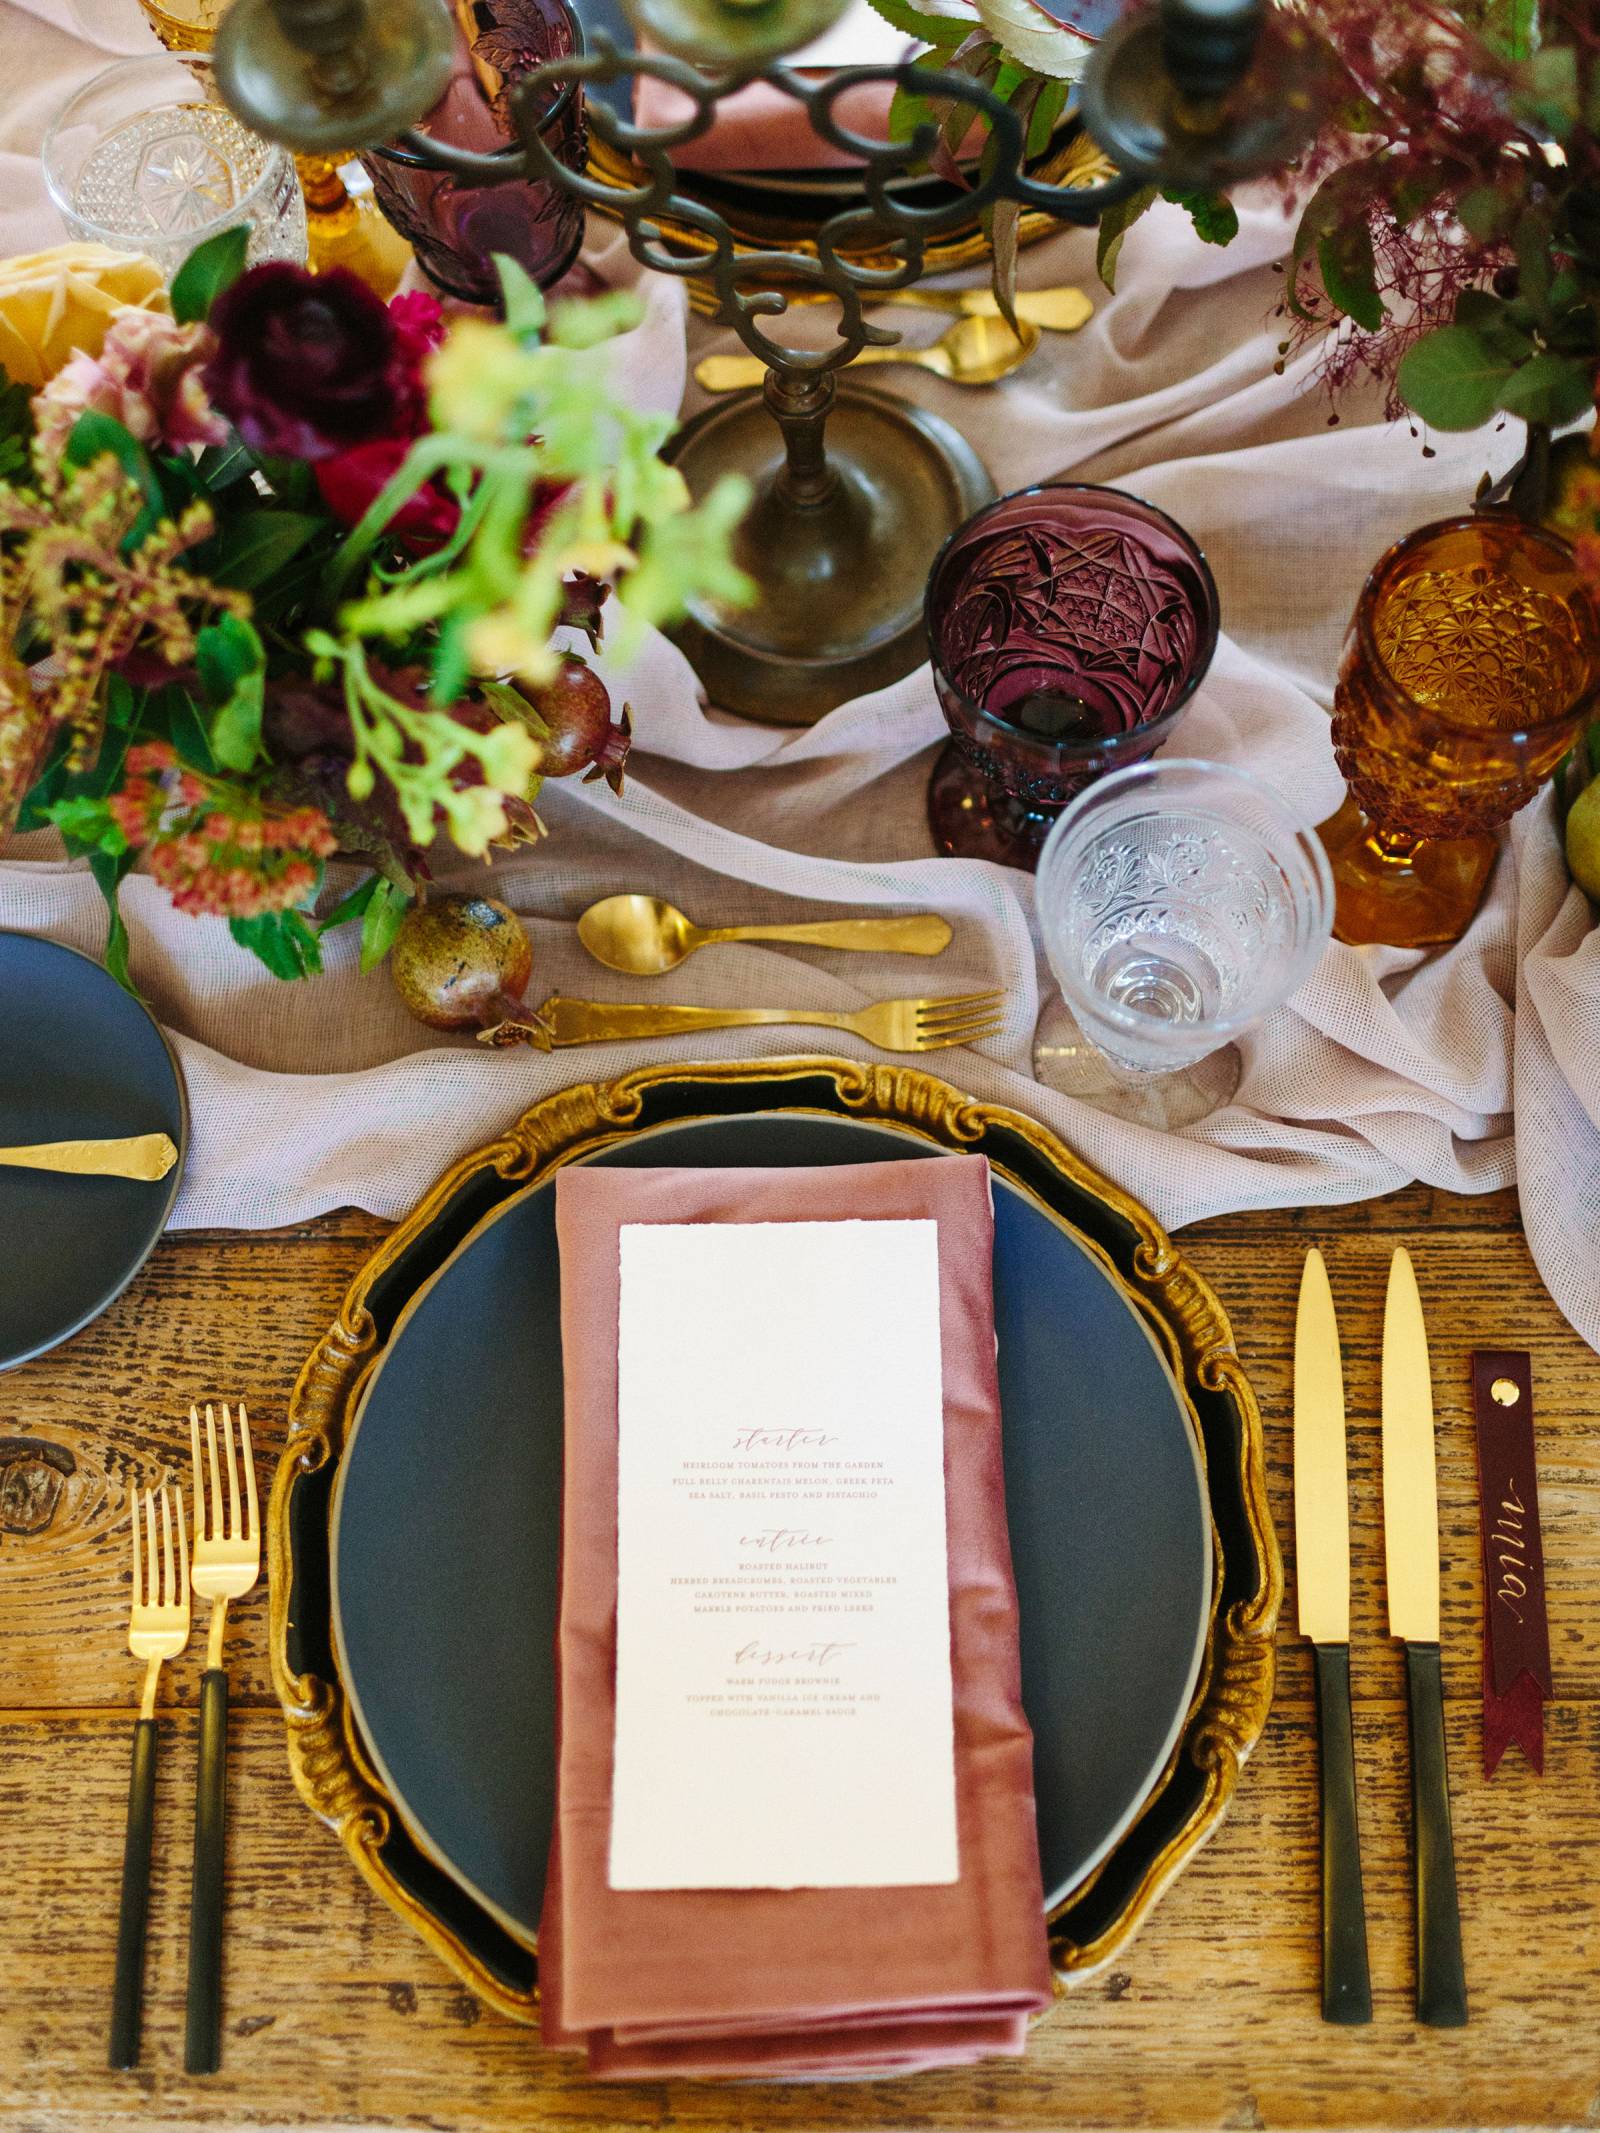 Black and gold flatware and charger with purple and gold cut-glass goblets